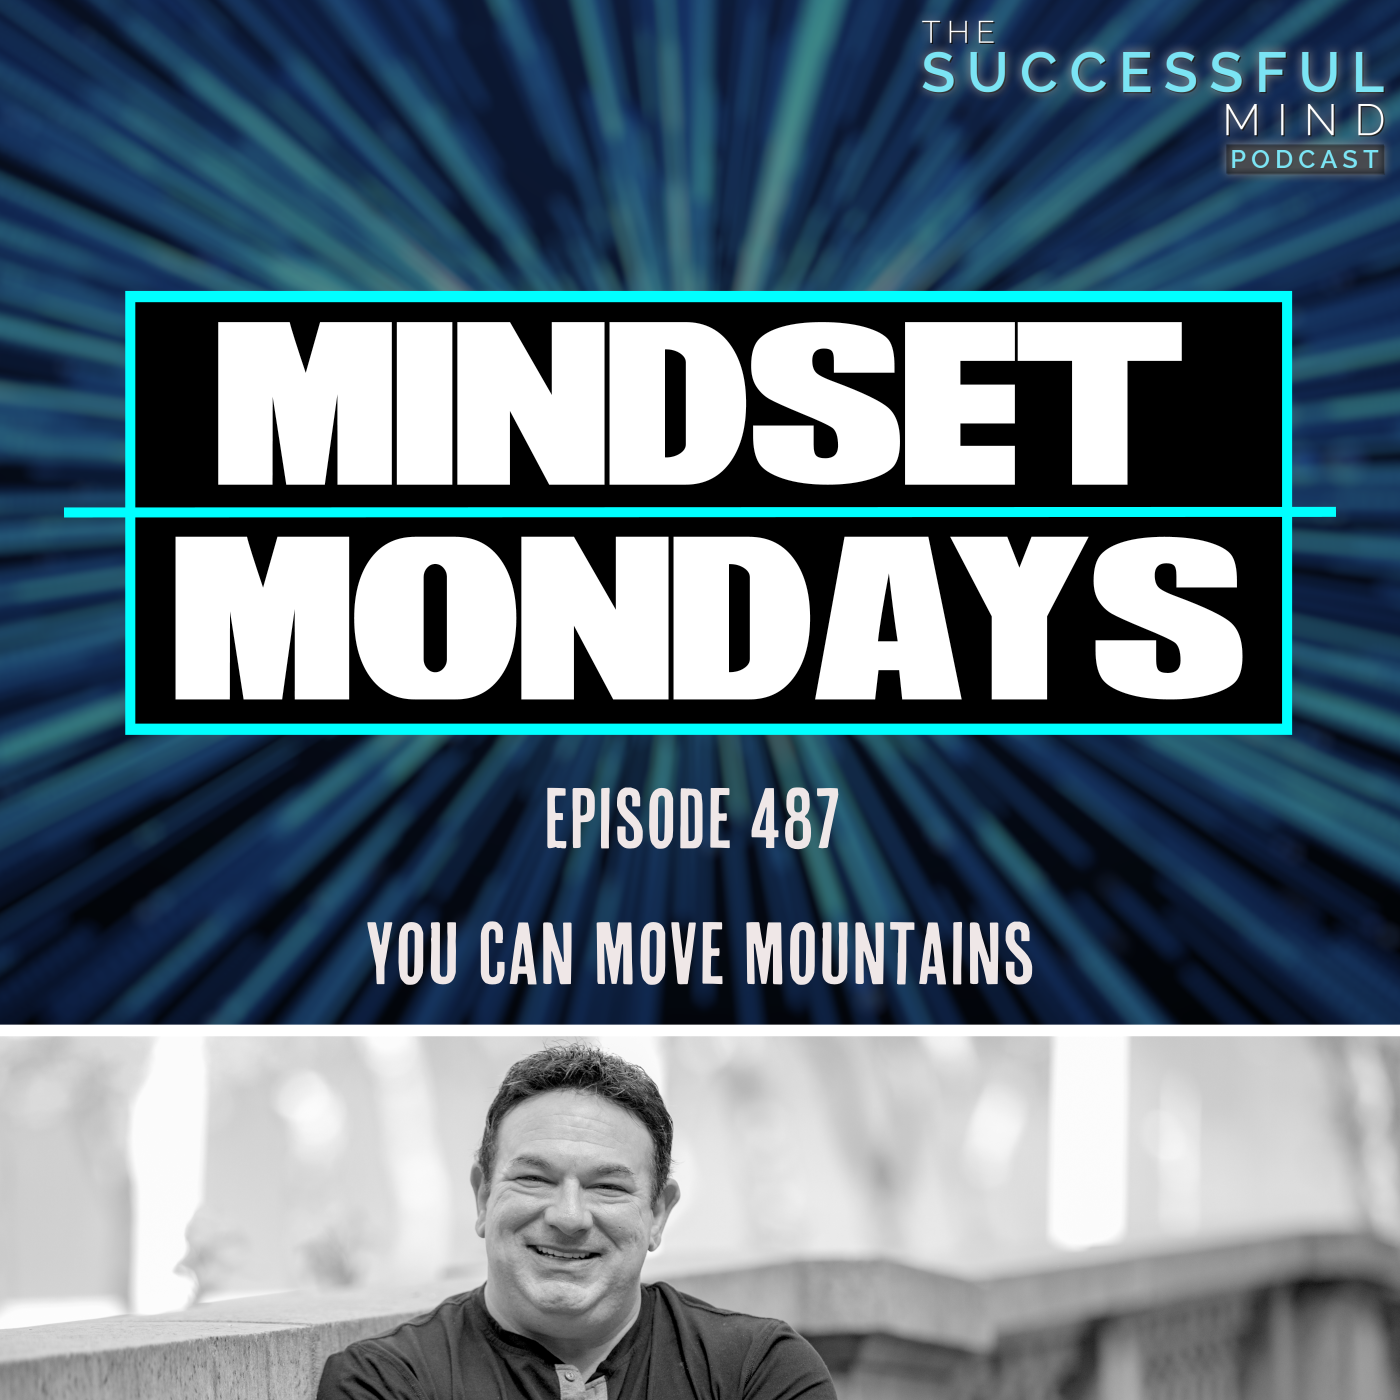 The Successful Mind Podcast - Episode 487 - You Can Move Mountains